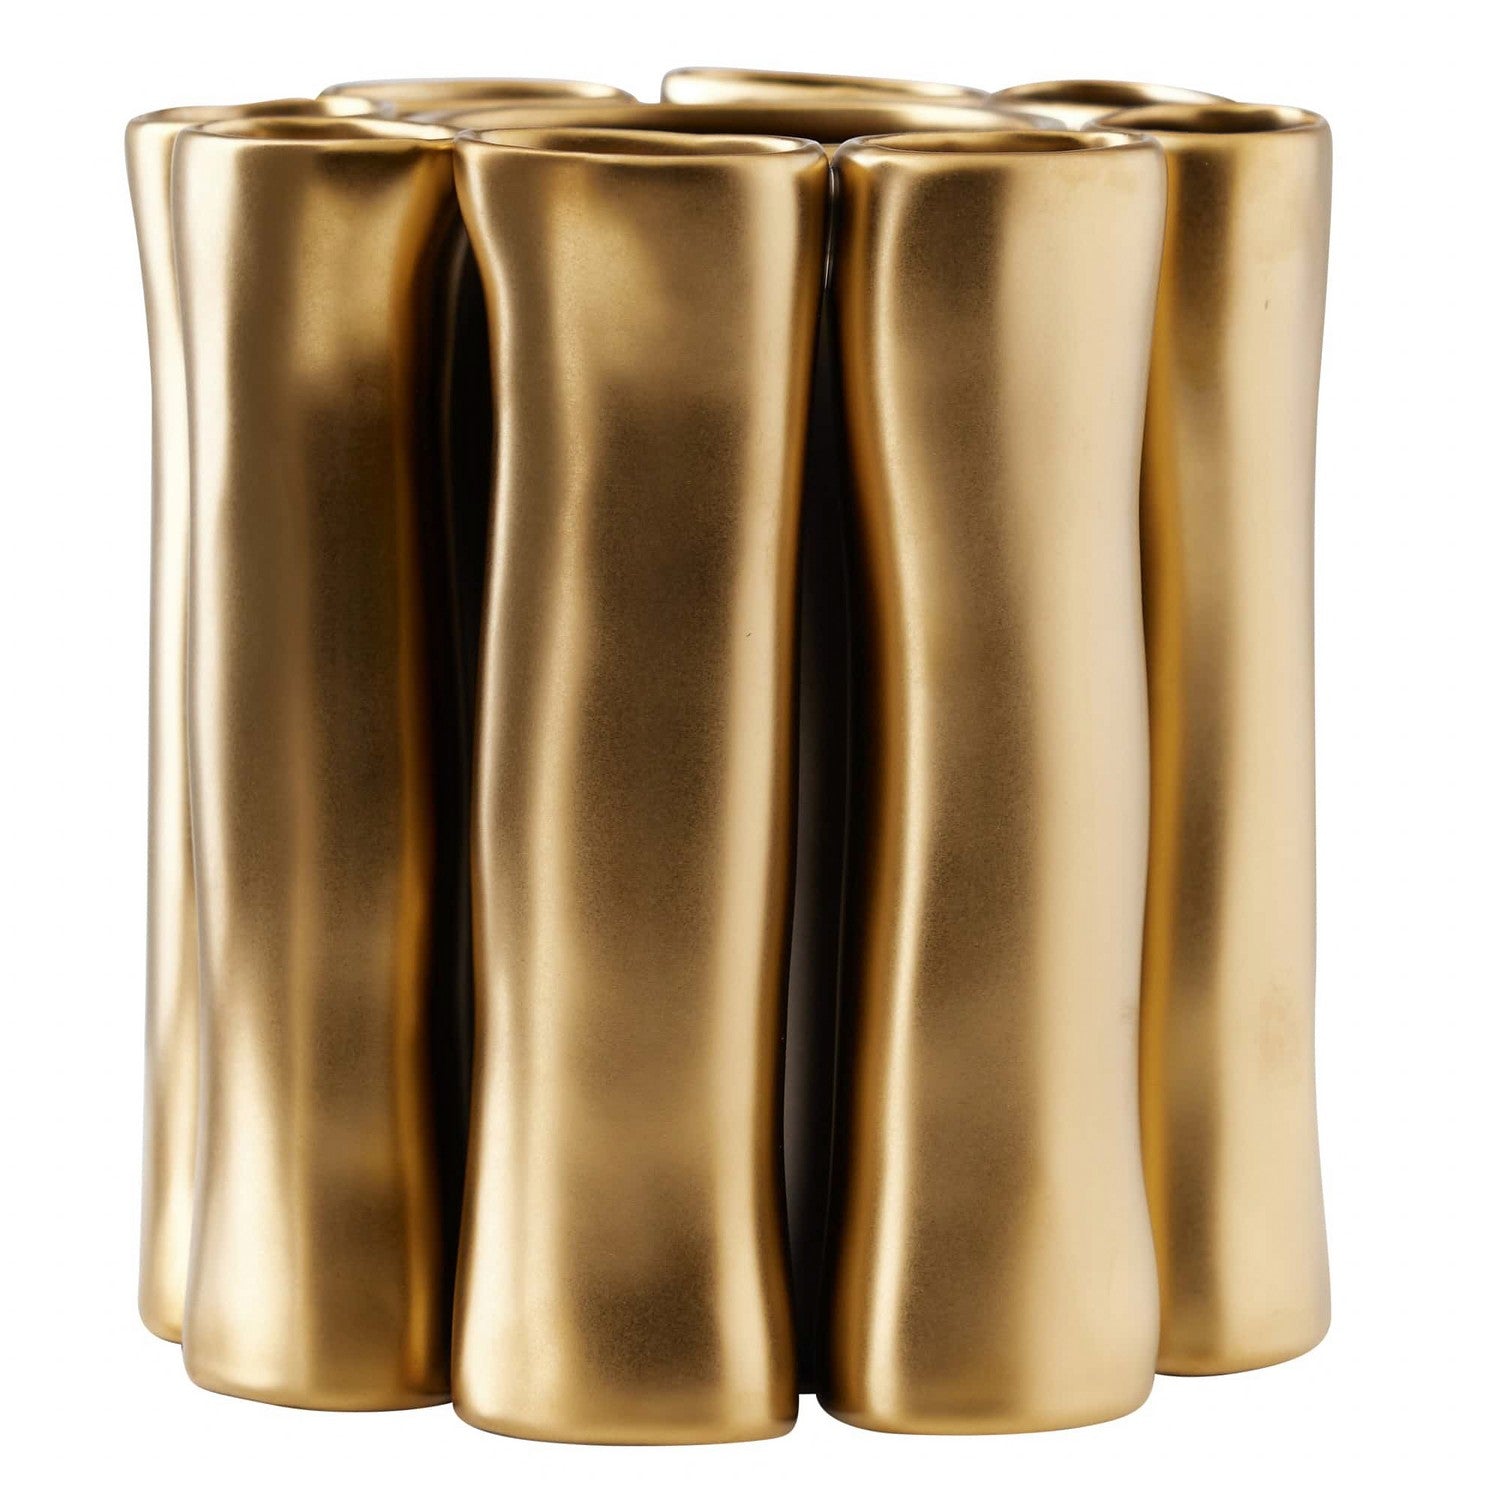 Vase from the Vescovi collection in Gold finish